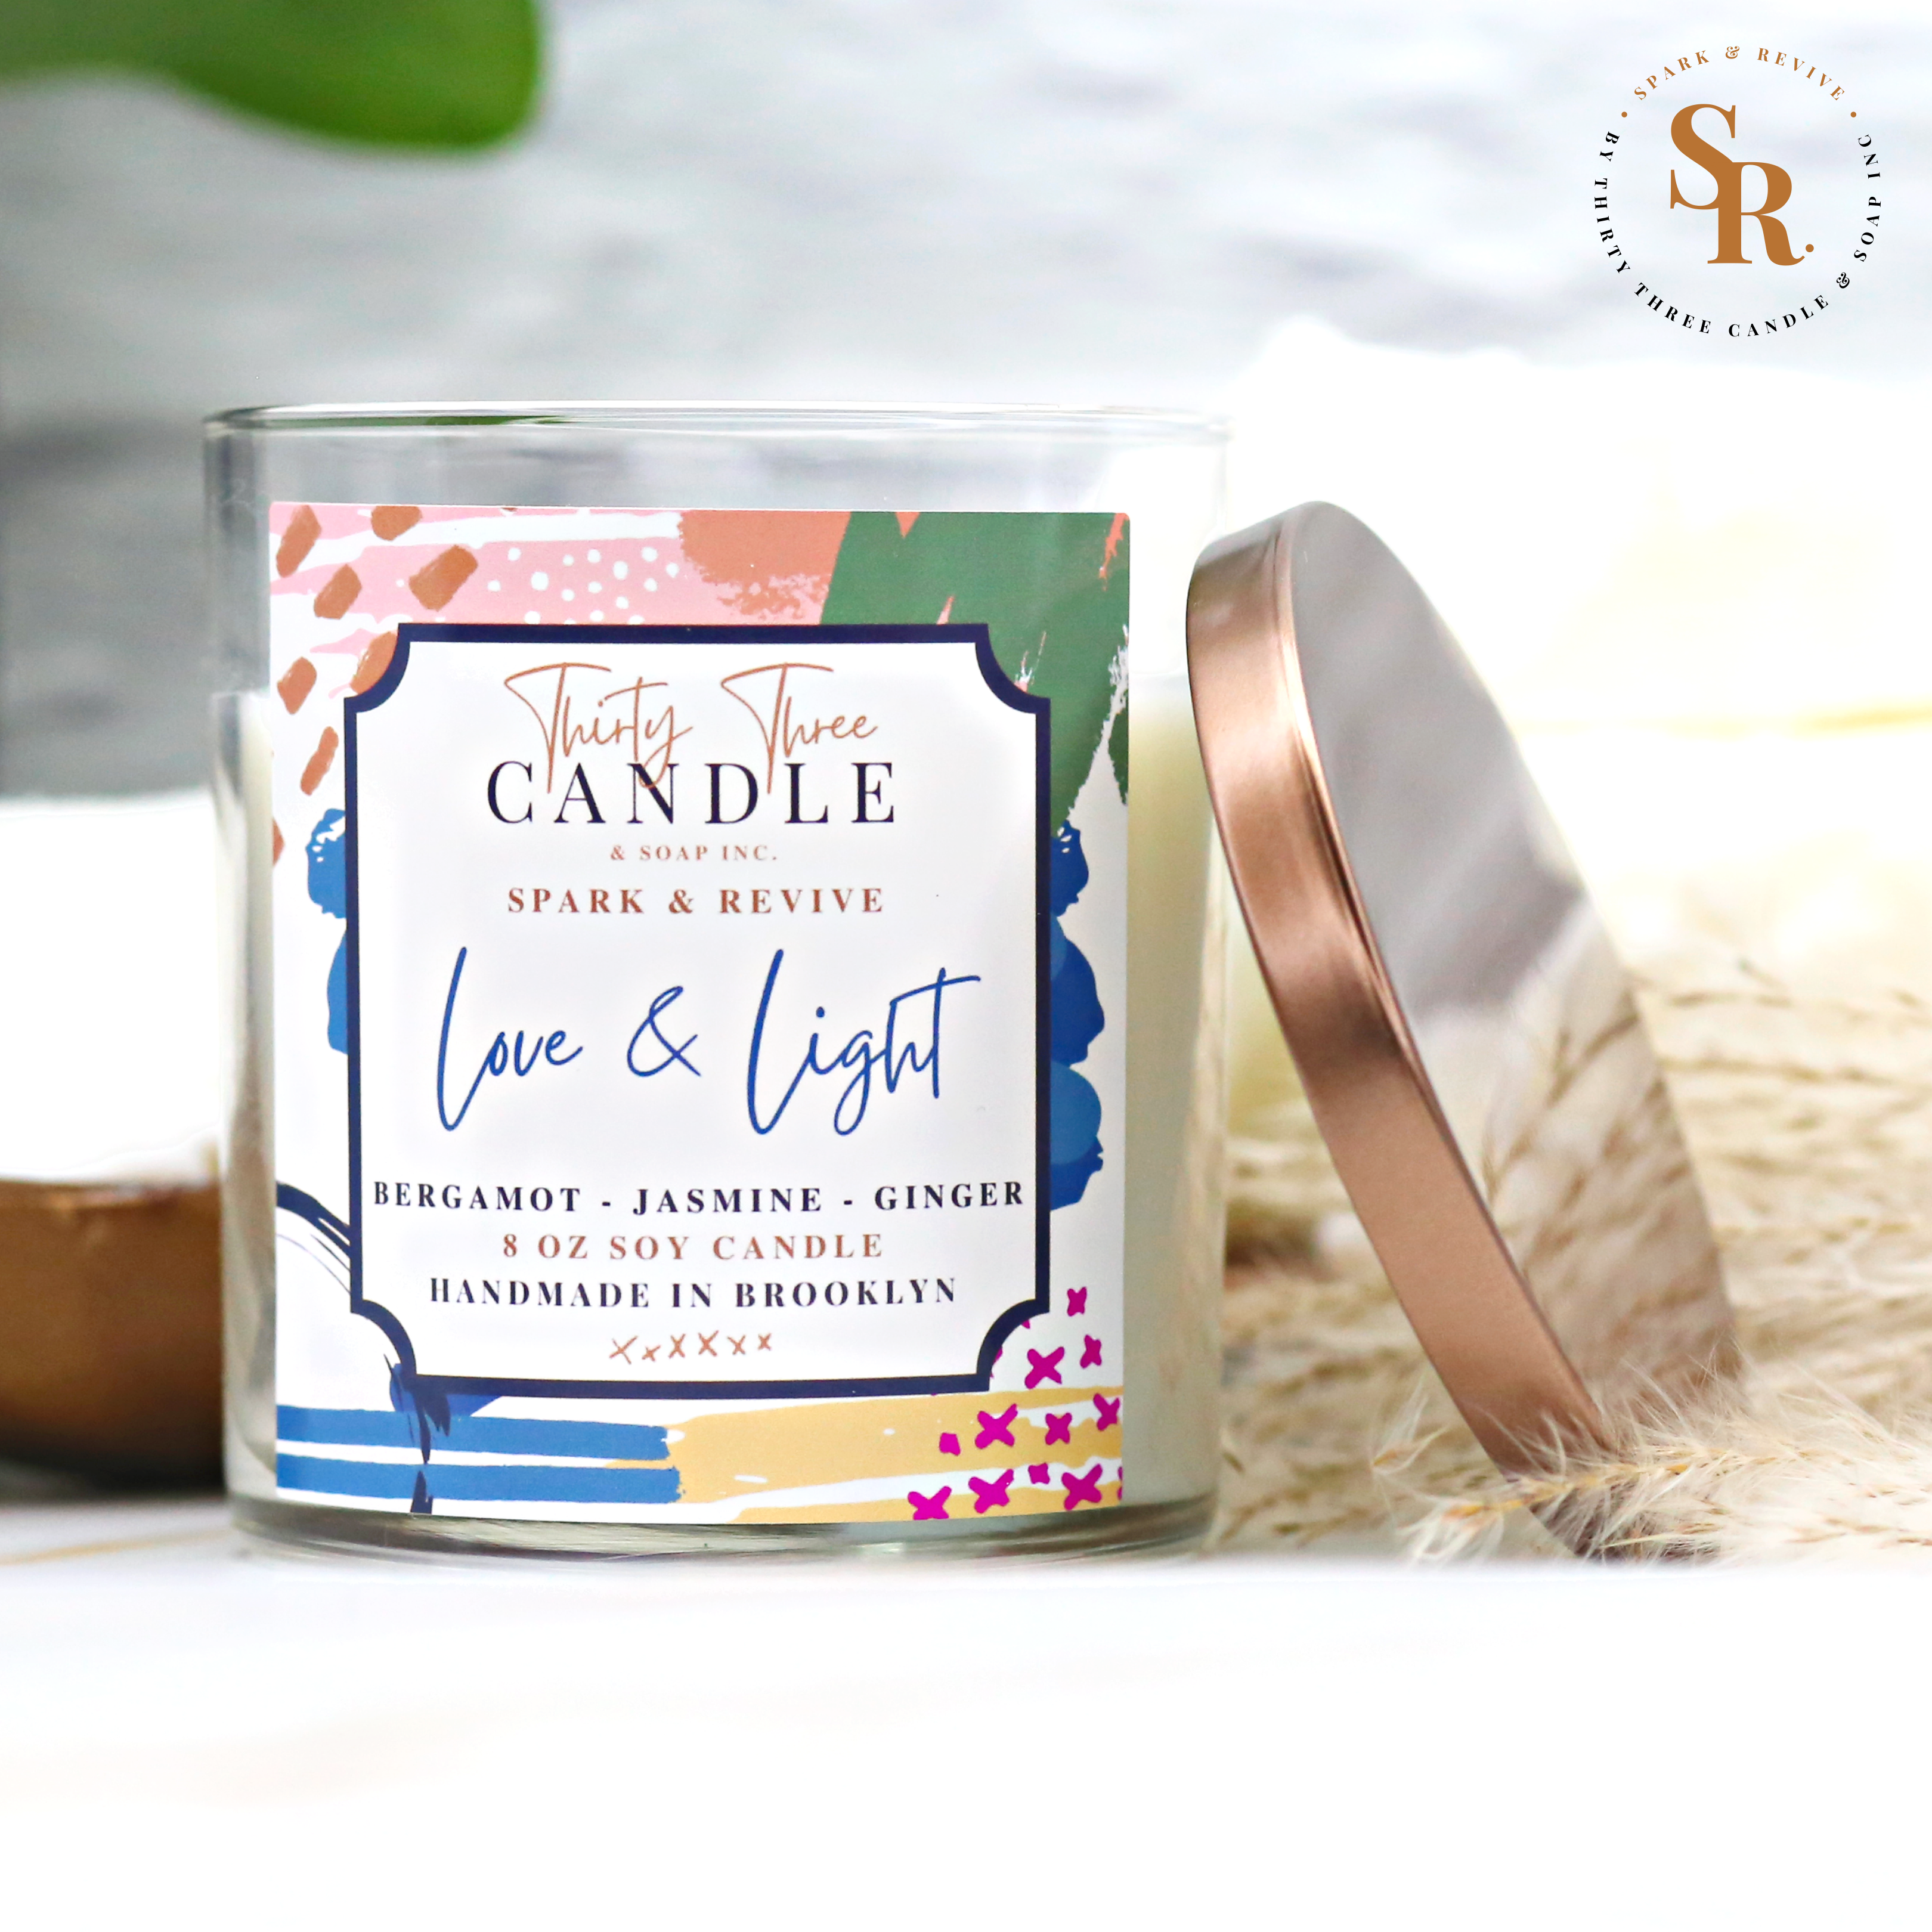 Uplift and transform your space with the soothing scent of our Love & Light scented soy candle.  Bringing the ultimate spa experience to your space with an ethereal quality, Love & Light has fresh top notes of mandarin and lemongrass. Elevating this luxurious scent are mid notes of bergamot and ginger. These fragrances blend beautifully with delicate jasmine and white tea to calm your senses and shed the outside world. @SparkandRevive